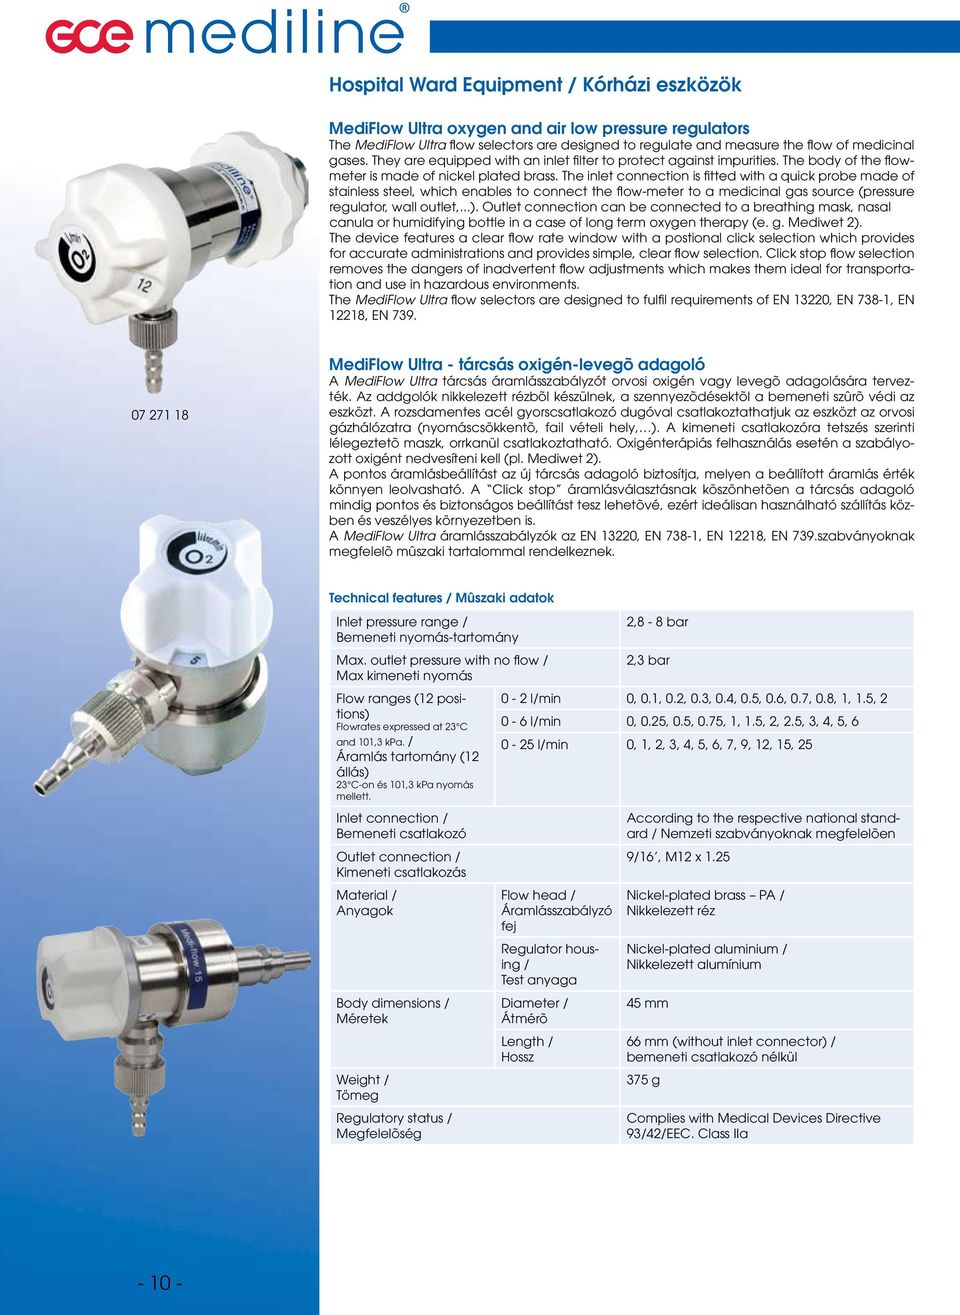 The inlet connection is fitted with a quick probe made of stainless steel, which enables to connect the flow-meter to a medicinal gas source (pressure regulator, wall outlet,...).